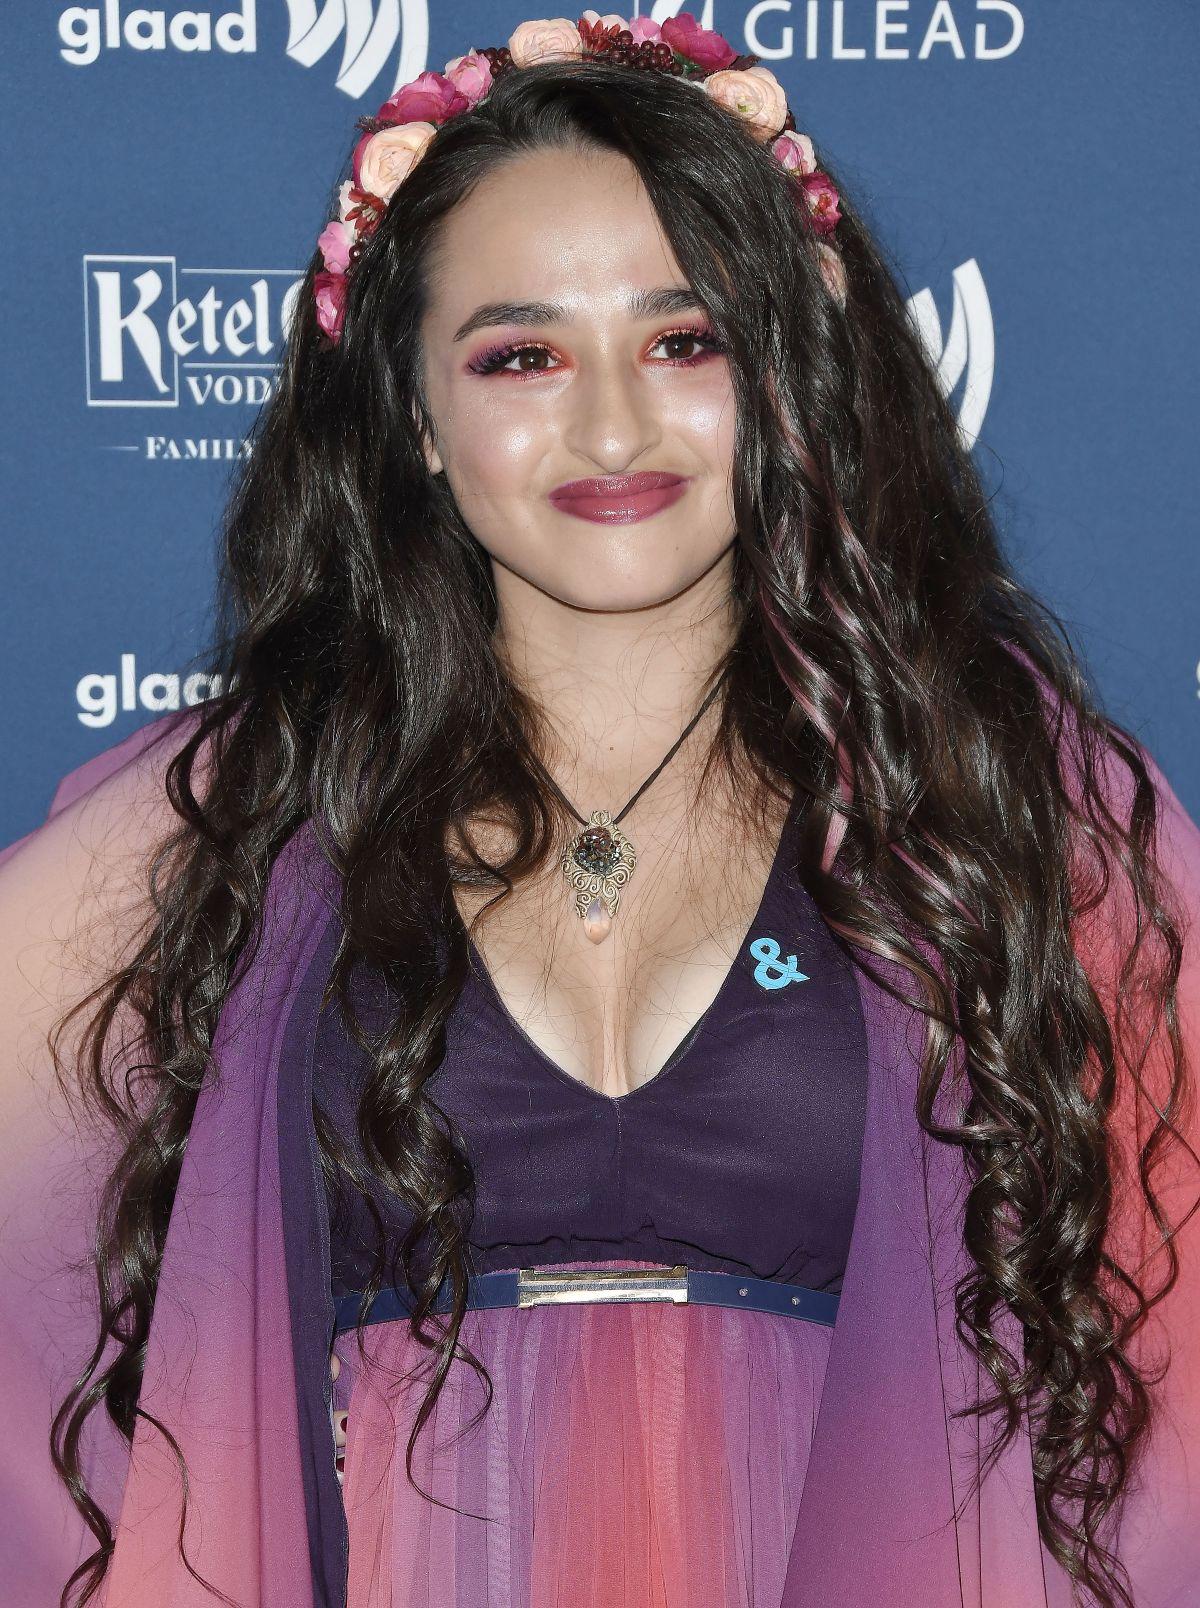 70+ Hot Pictures Of Jazz Jennings Which Will Make Your Mouth Water 57